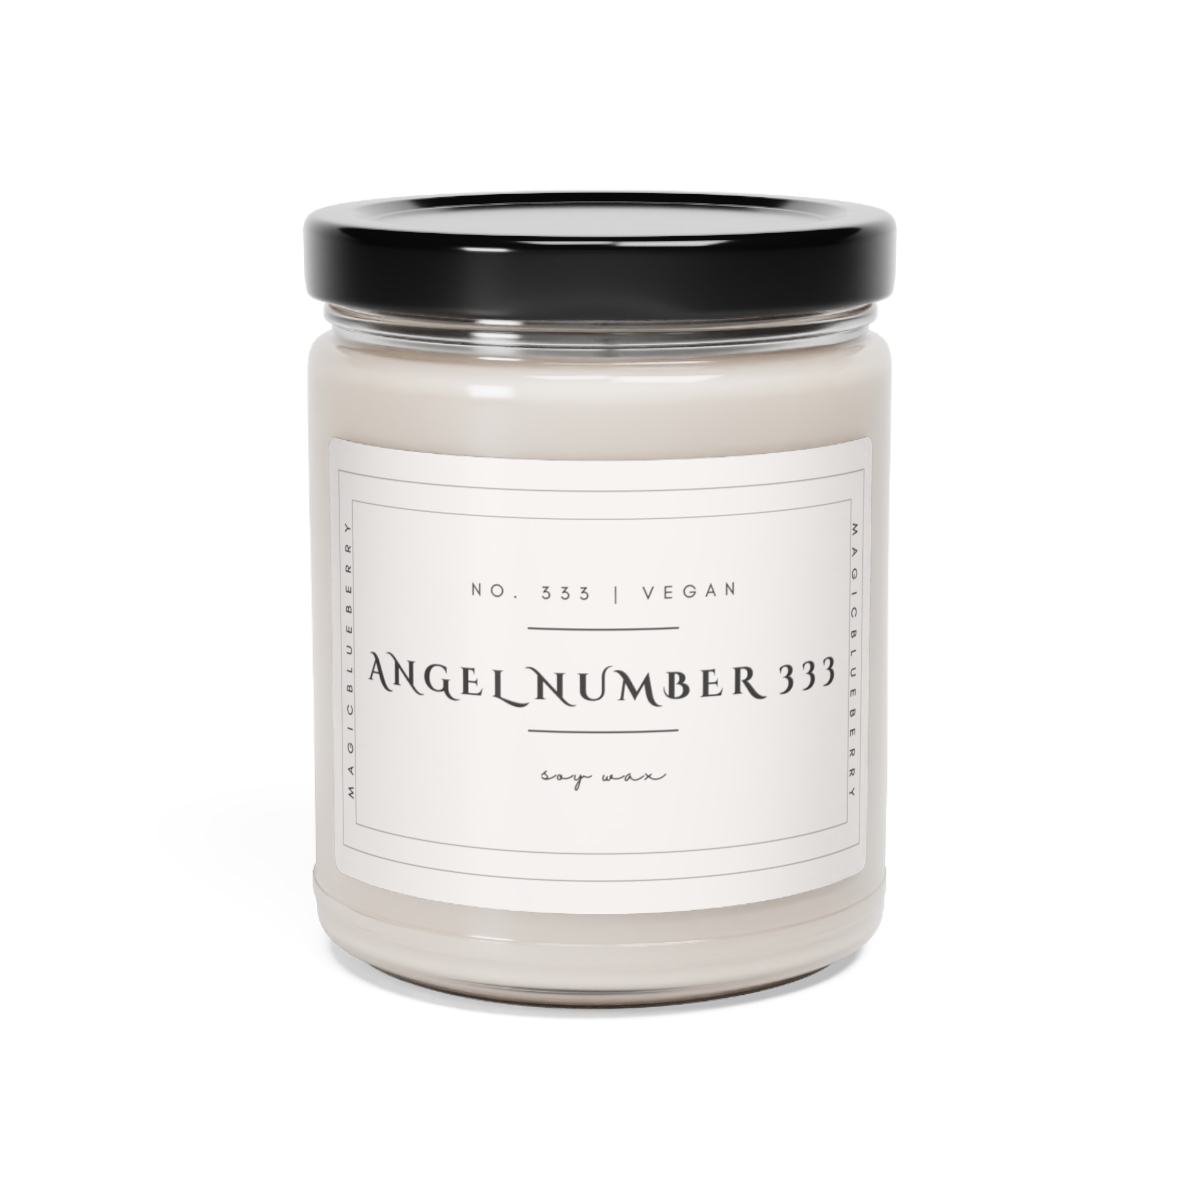 Angel number333 Scented Vegan Soy Wax Candle Clear Jar Candle, Spell Candle, Sassy Candle Vegan Candle Cotton Wick Candle Home Decor Candle product thumbnail image